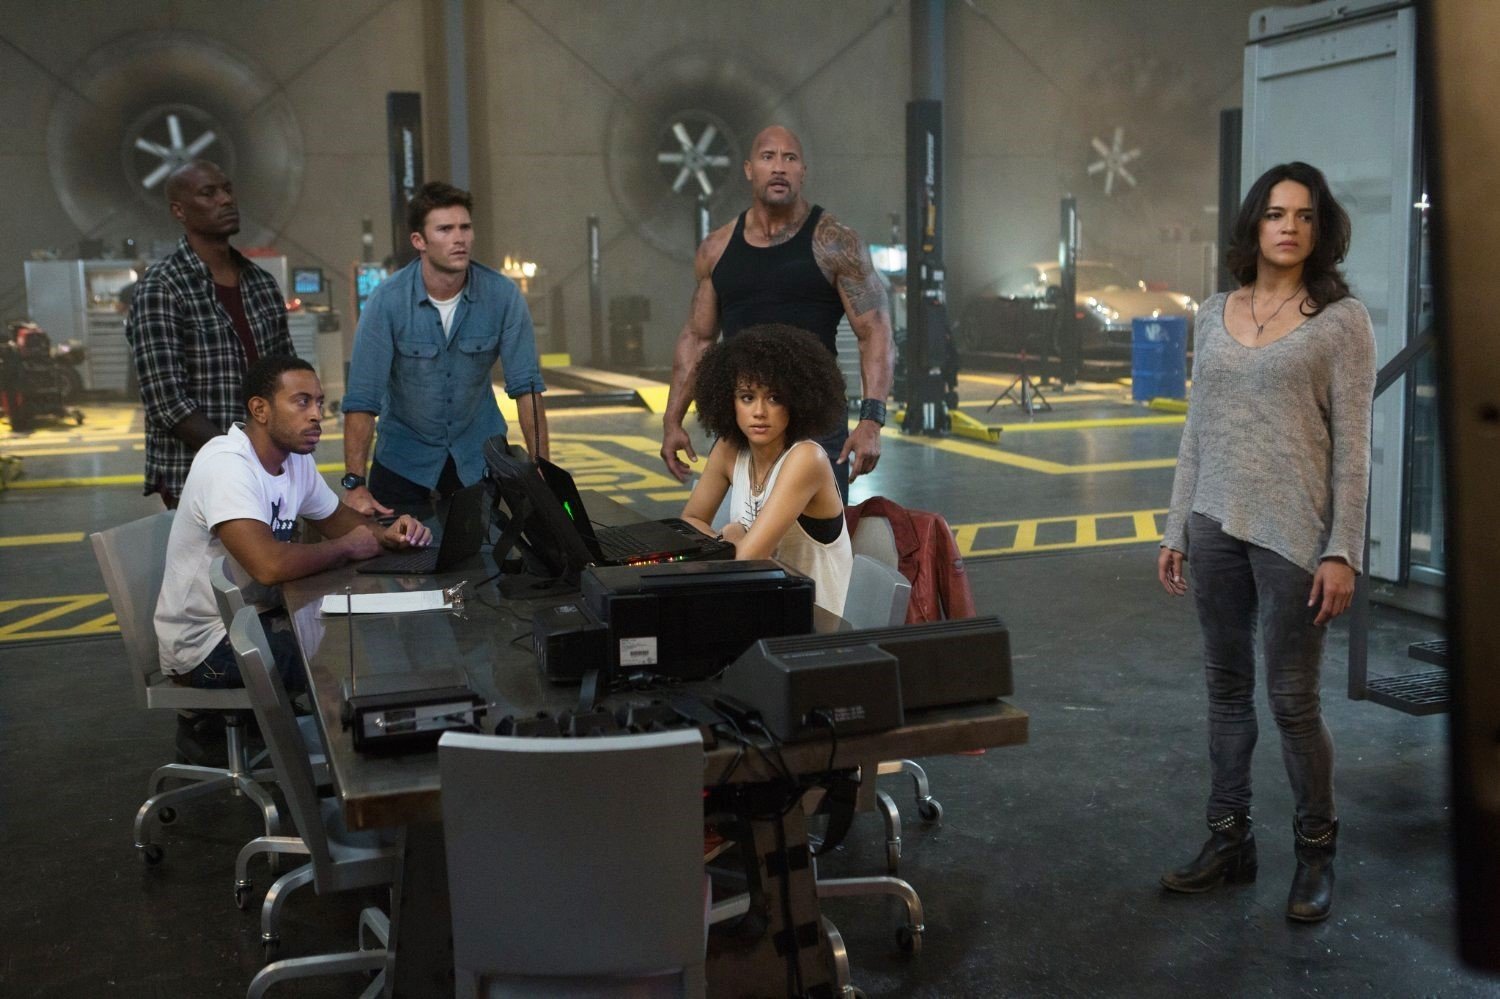 Tyrese Gibson, Ludacris, Scott Eastwood, The Rock, Nathalie Emmanuel and Michelle Rodriguez in Universal Pictures' The Fate of the Furious (2017)